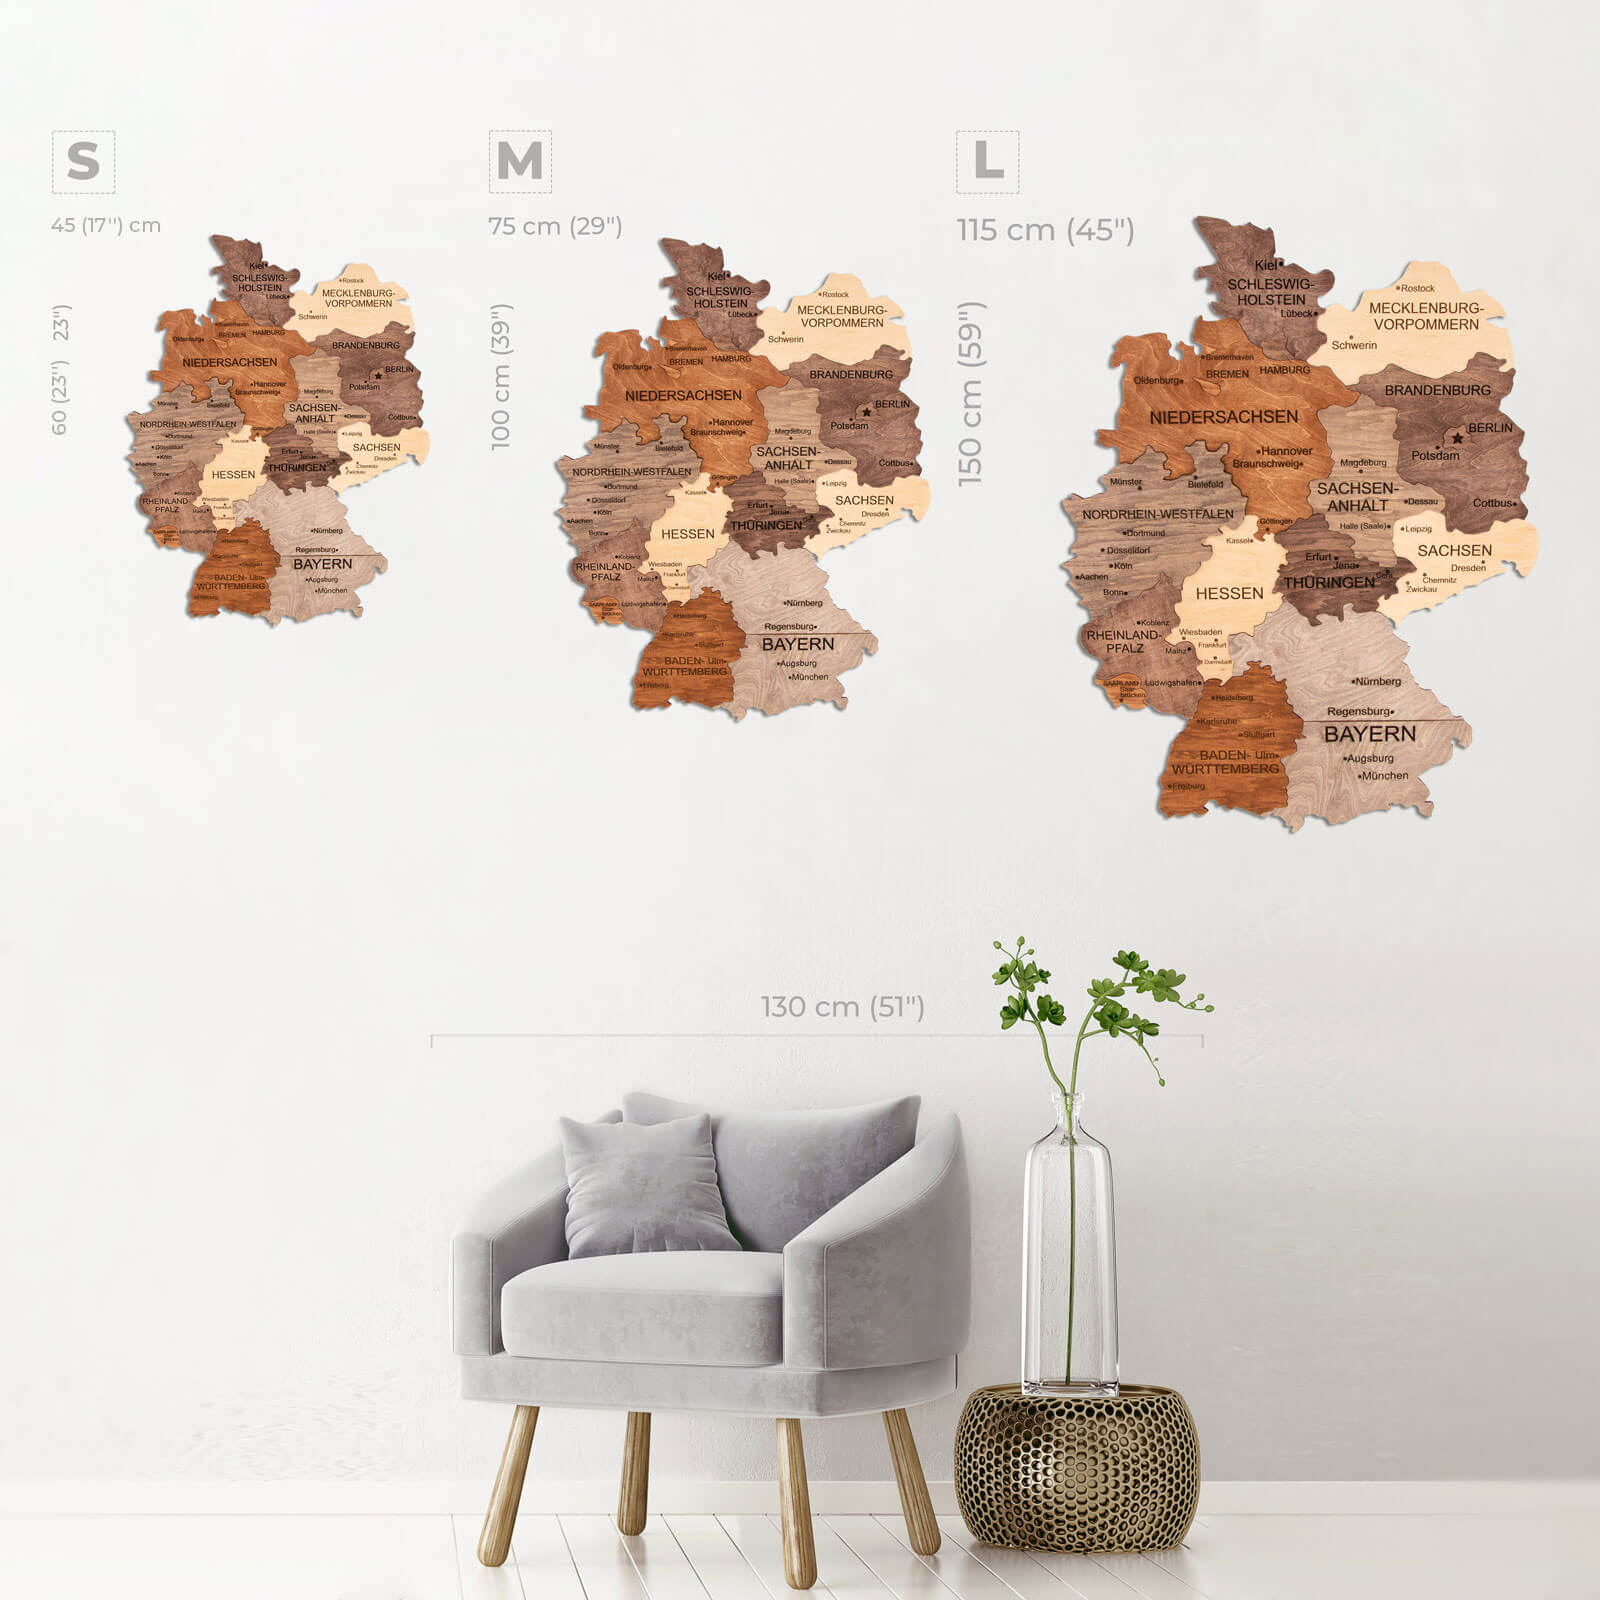 3D Germany Wooden Map Multicolor by Enjoy The Wood